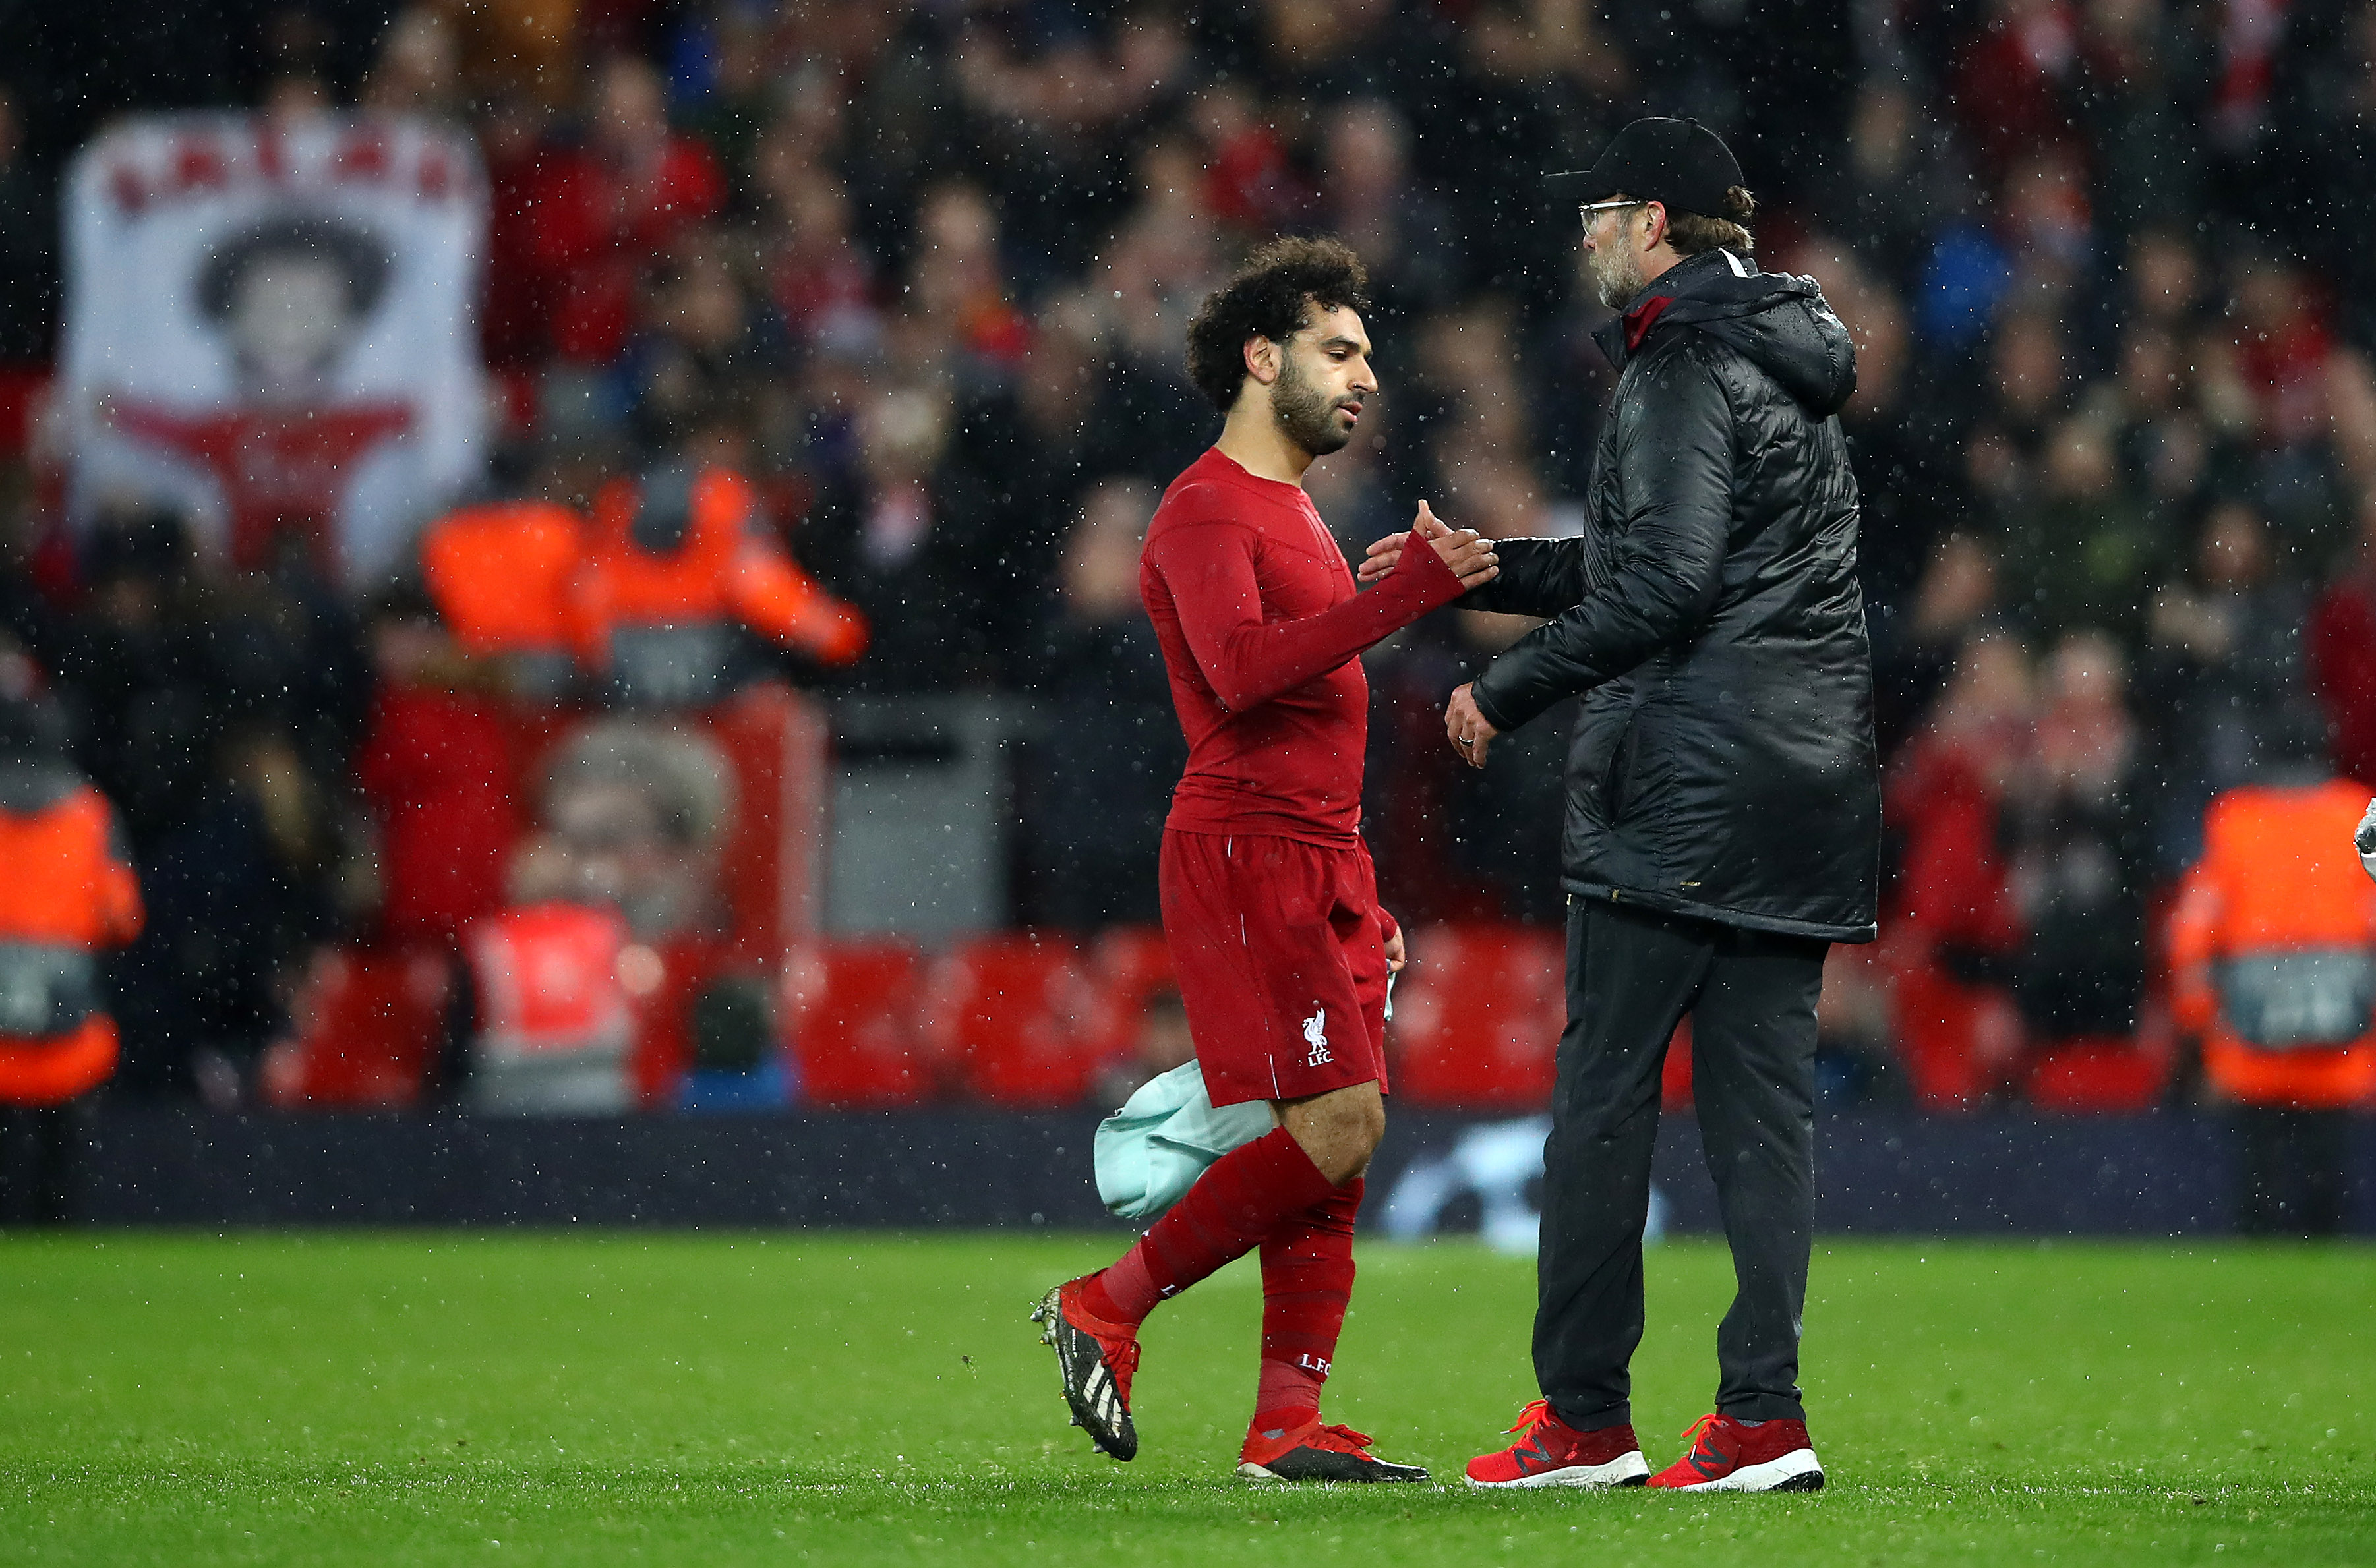 LIVERPOOL, ENGLAND - FEBRUARY 19: Mohamed Salah of Liverpool with his manager Jurgen Klopp at the final whistle during the UEFA Champions League Round of 16 First Leg match between Liverpool and FC Bayern Muenchen at Anfield on February 19, 2019 in Liverpool, England. (Photo by Clive Brunskill/Getty Images)